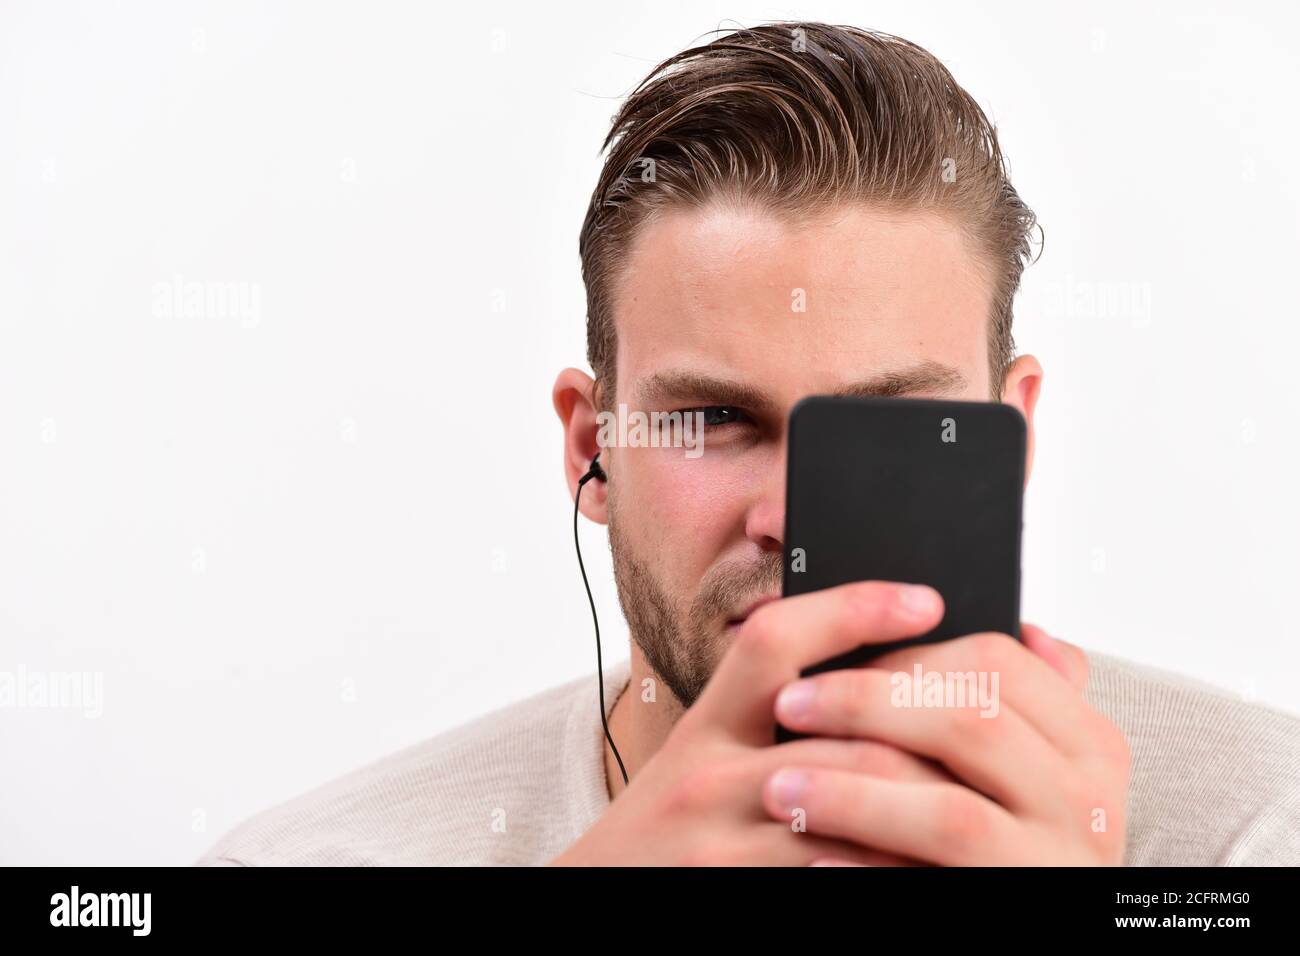 man-with-attentive-face-looks-at-mobile-phone-entertainment-and-musical-lifestyle-concept-guy-with-beard-holds-mp3-player-and-wears-earphones-on-white-background-macho-with-headphones-watches-video-2CFRMG0.jpg